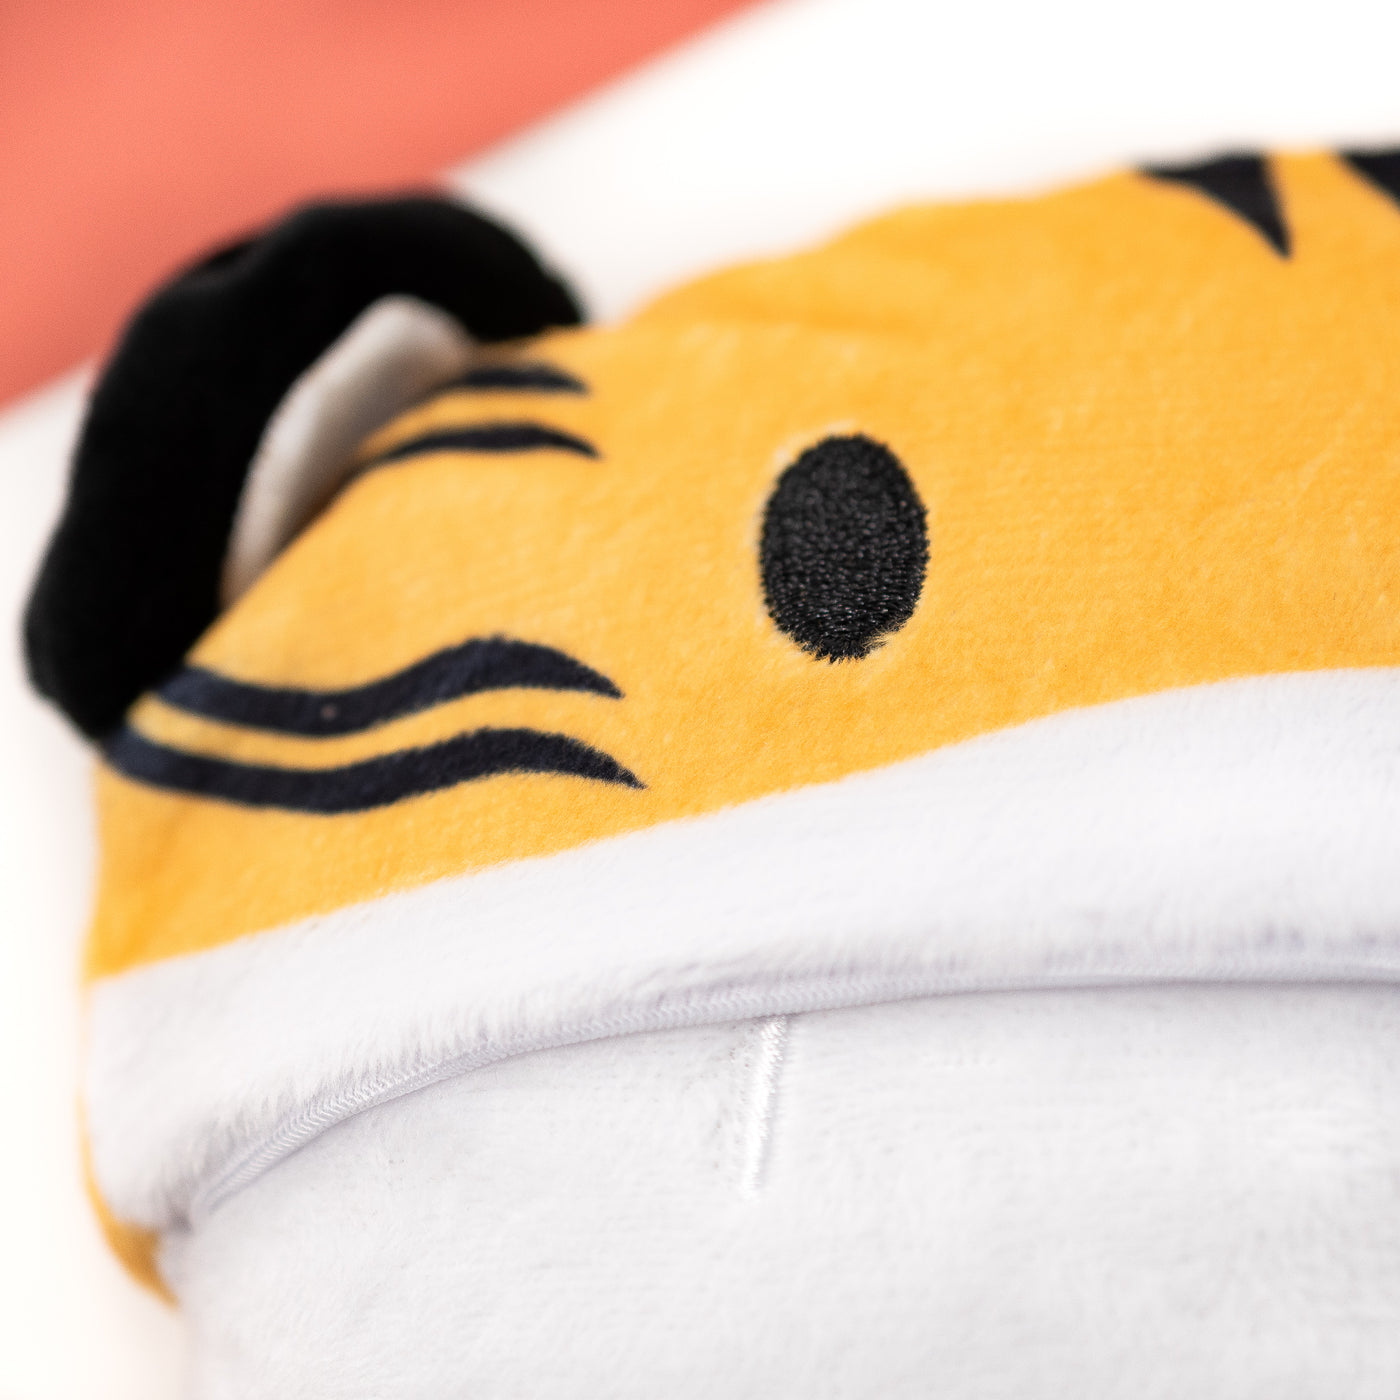 PLUSH011 | Steamie with Tofu the Tiger Hat Plushie